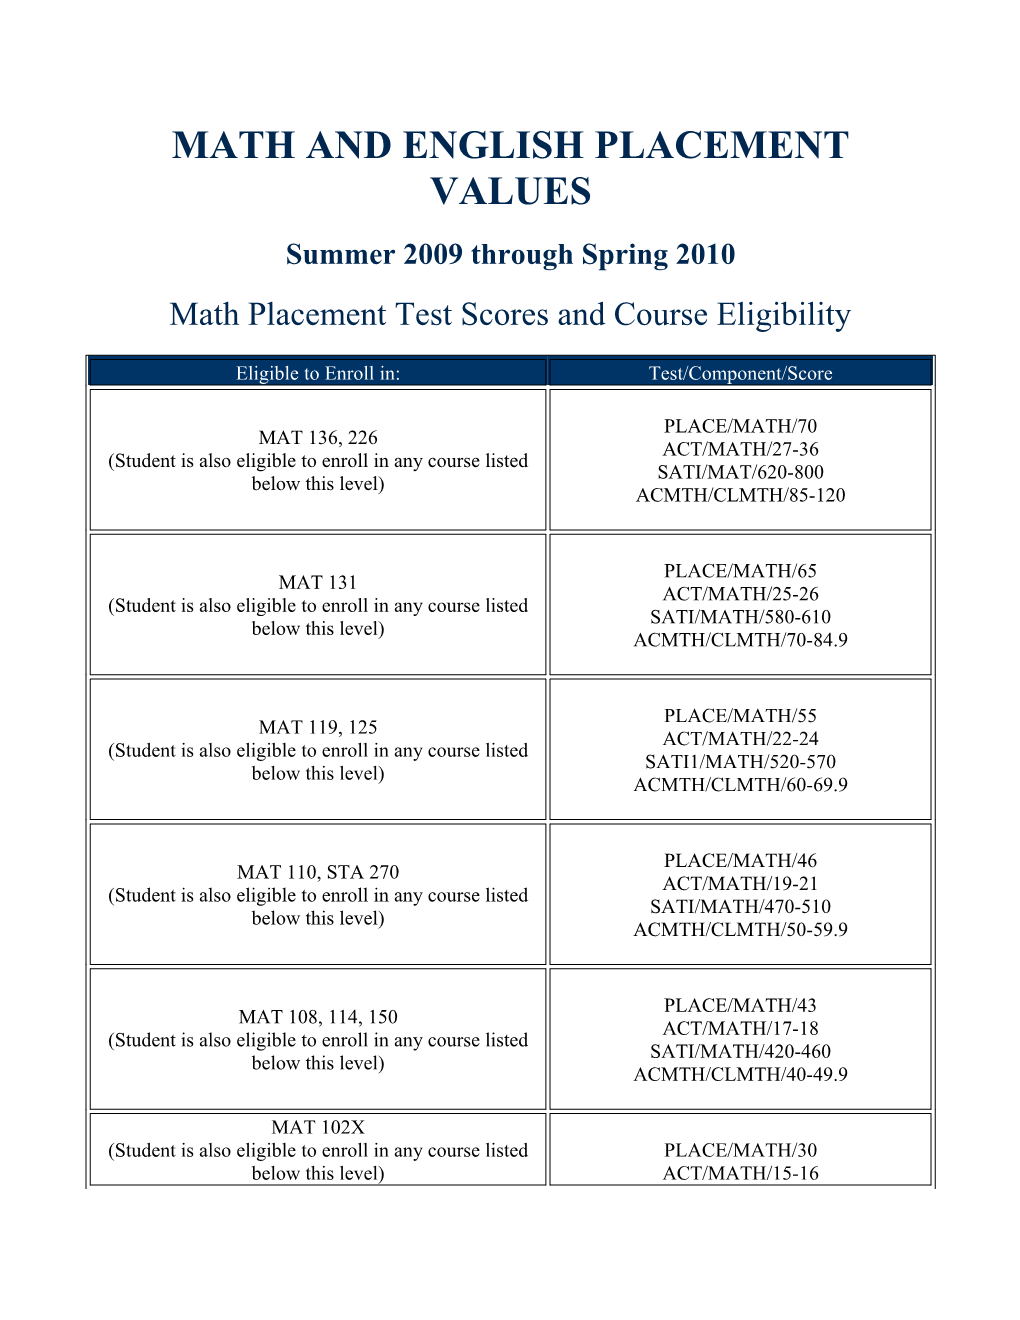 Math and English Placement Values